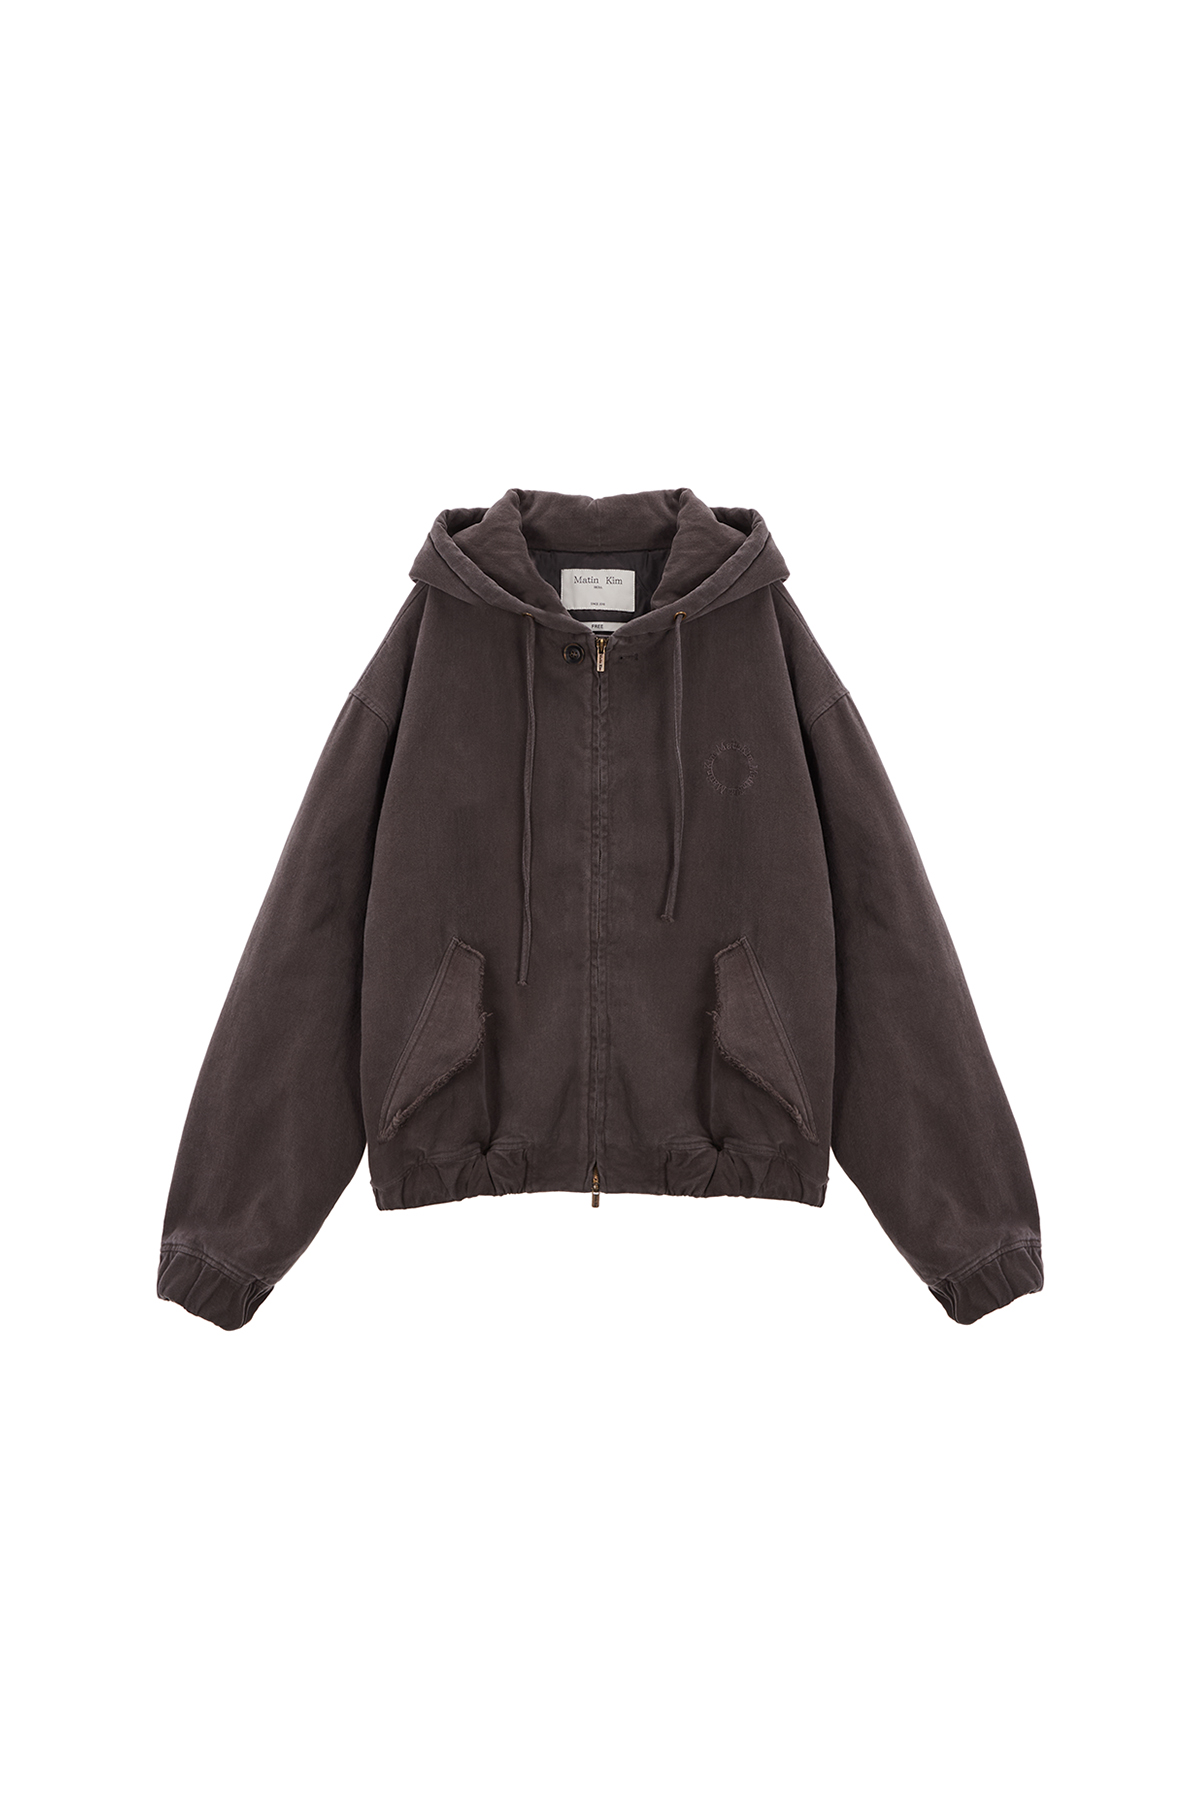 CATION WASHED HOODY ZIP UP JUMPER IN CHARCOAL